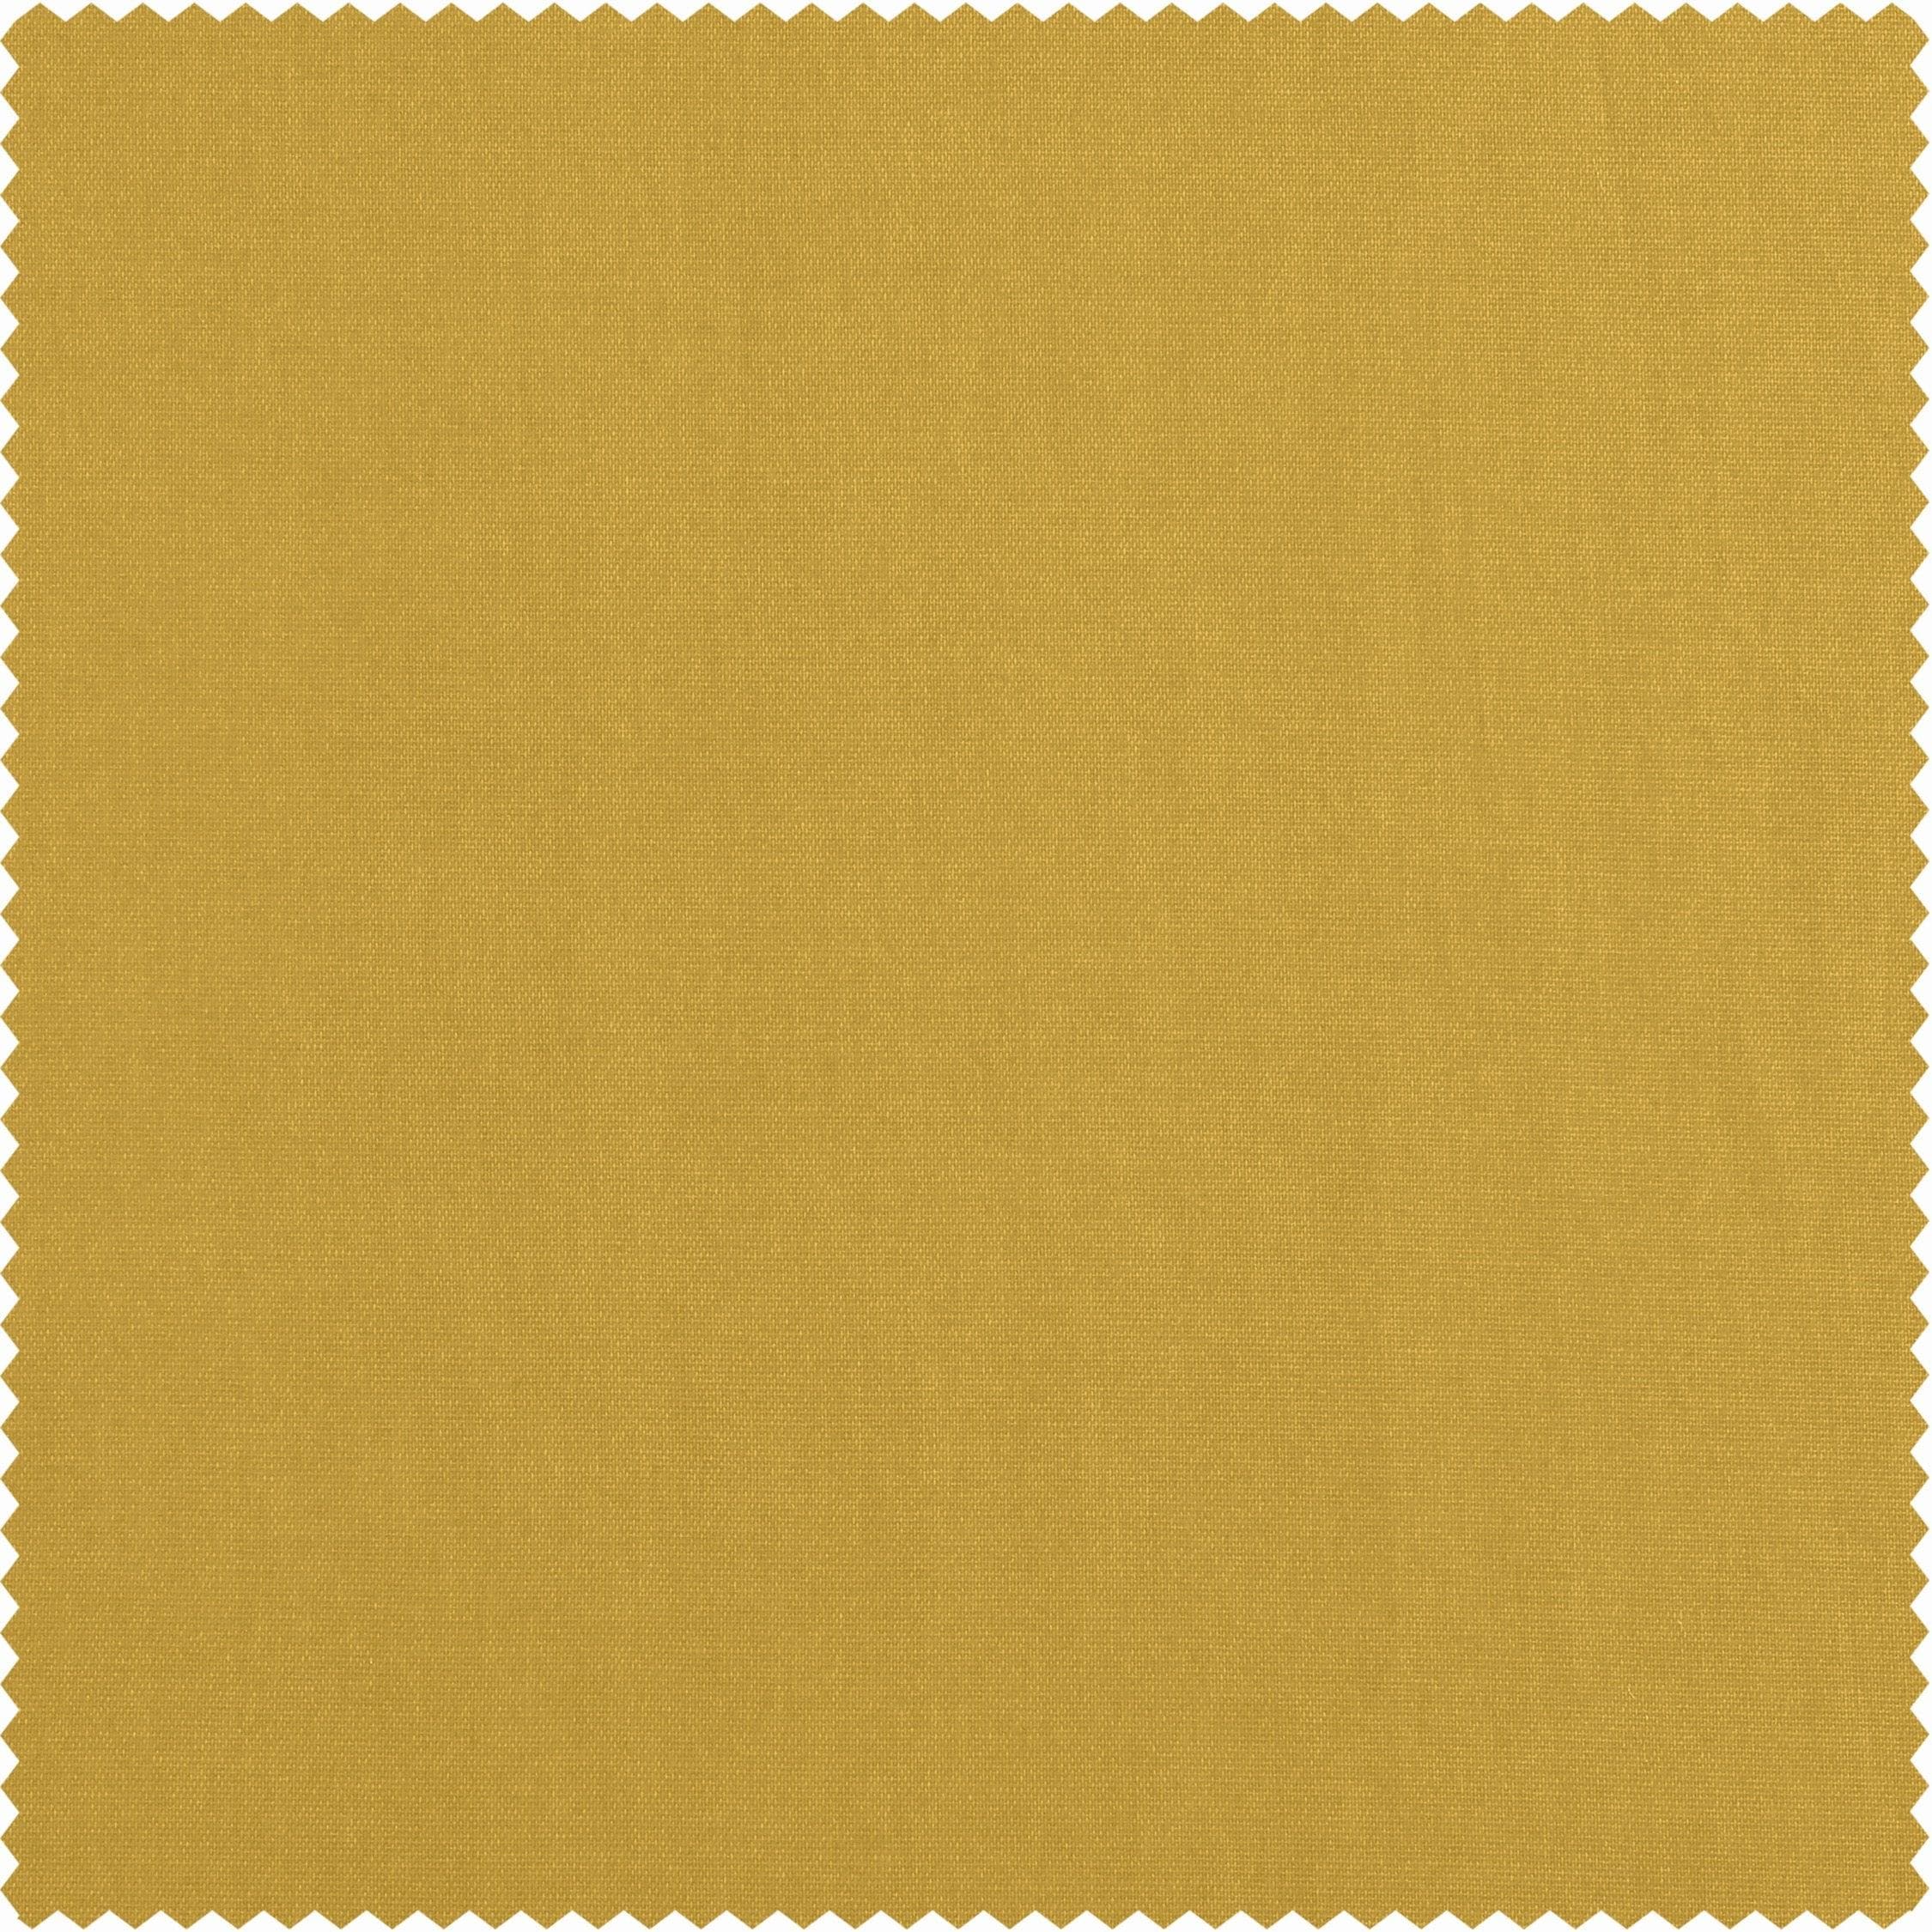 Mustard Yellow Solid Cotton Twill Swatch